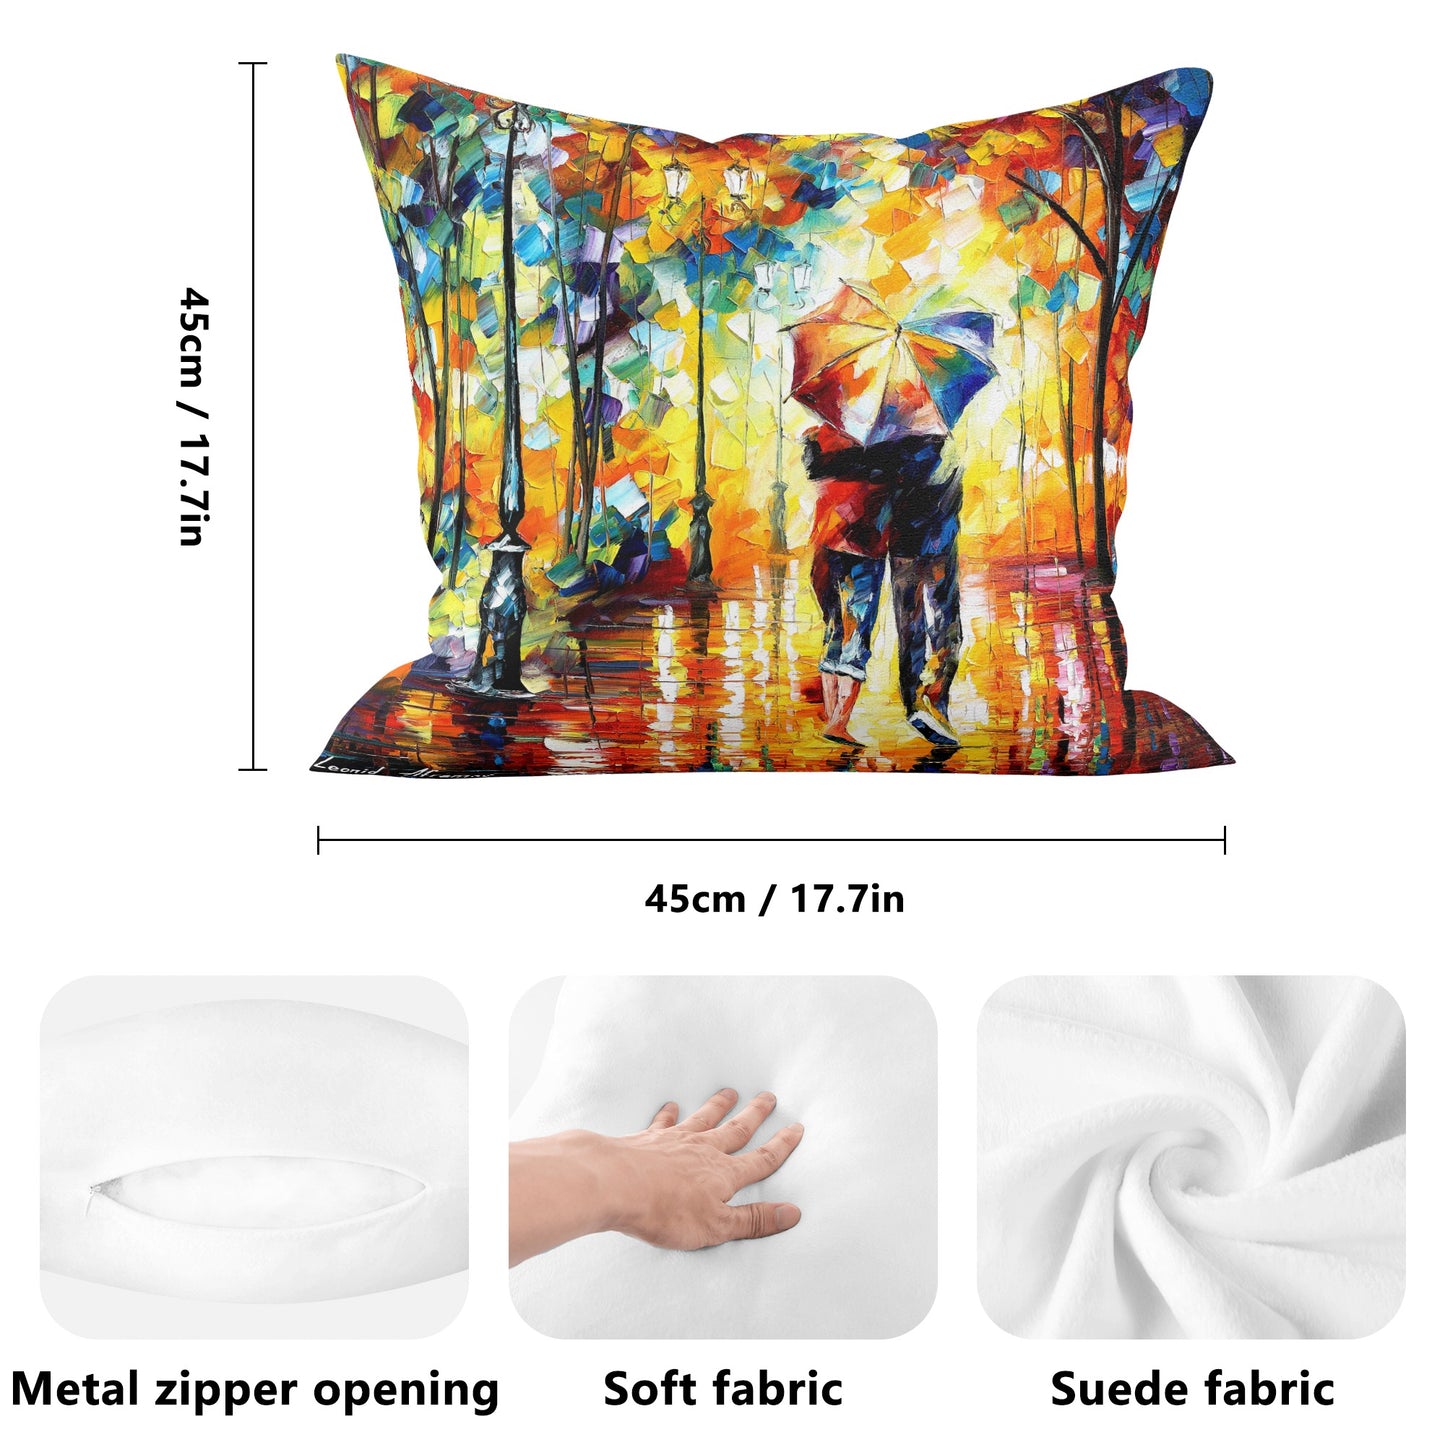 Double Side Printing Pillow Cover Afremov COUPLE UNDER ONE UMBRELLA